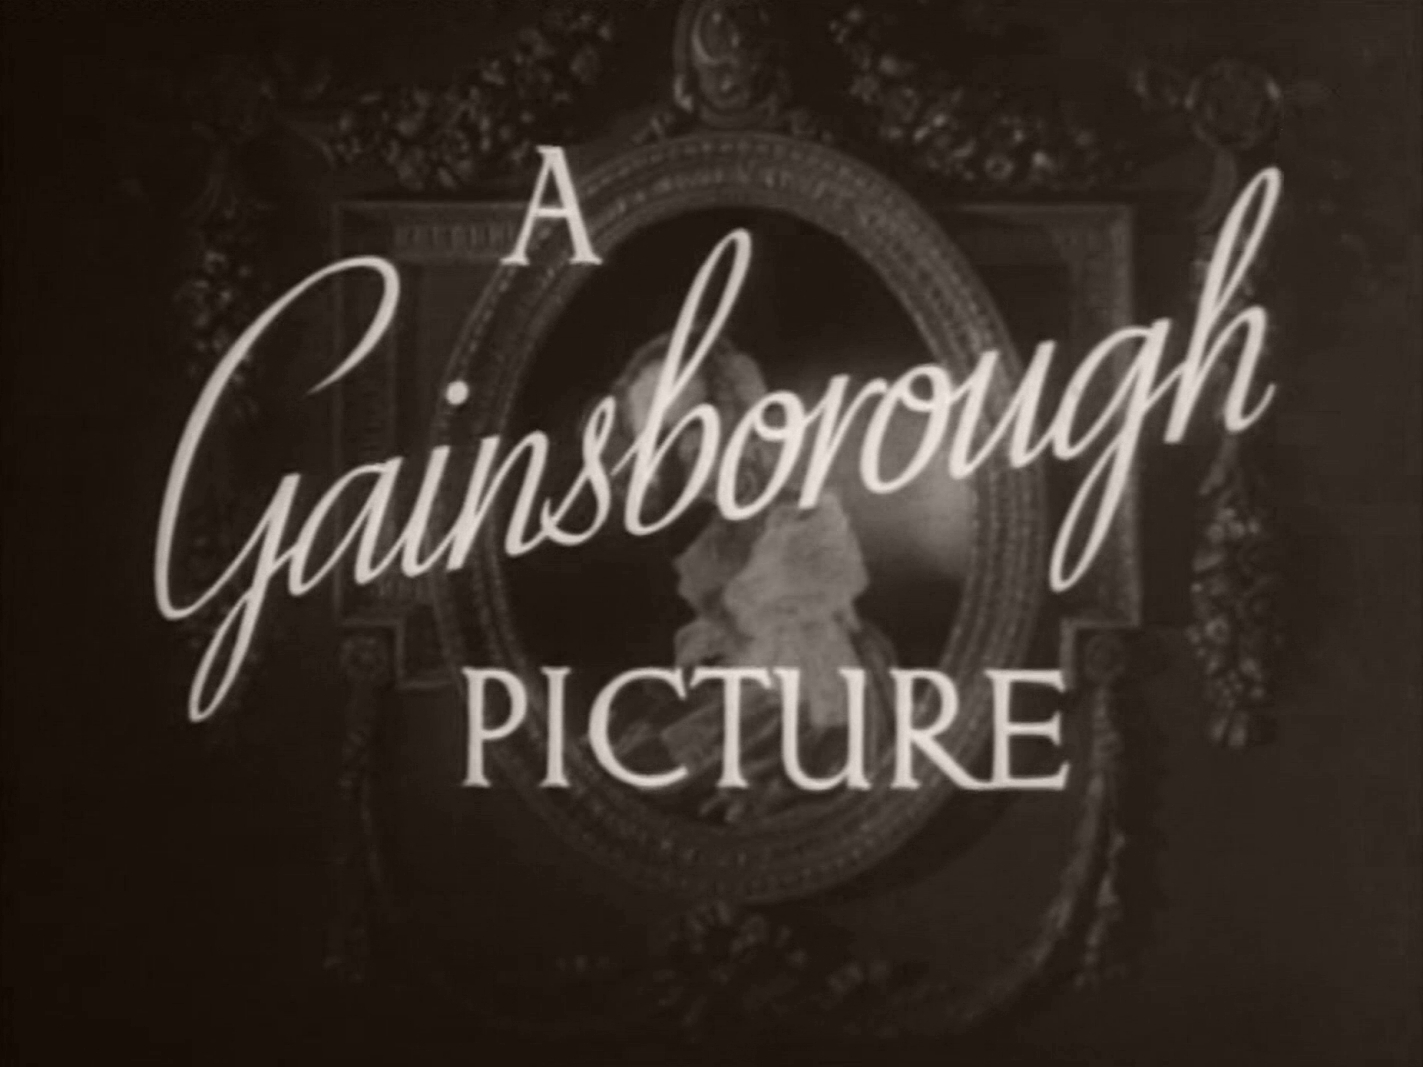 Main title from Convict 99 (1938) (1).  A Gainsborough Picture